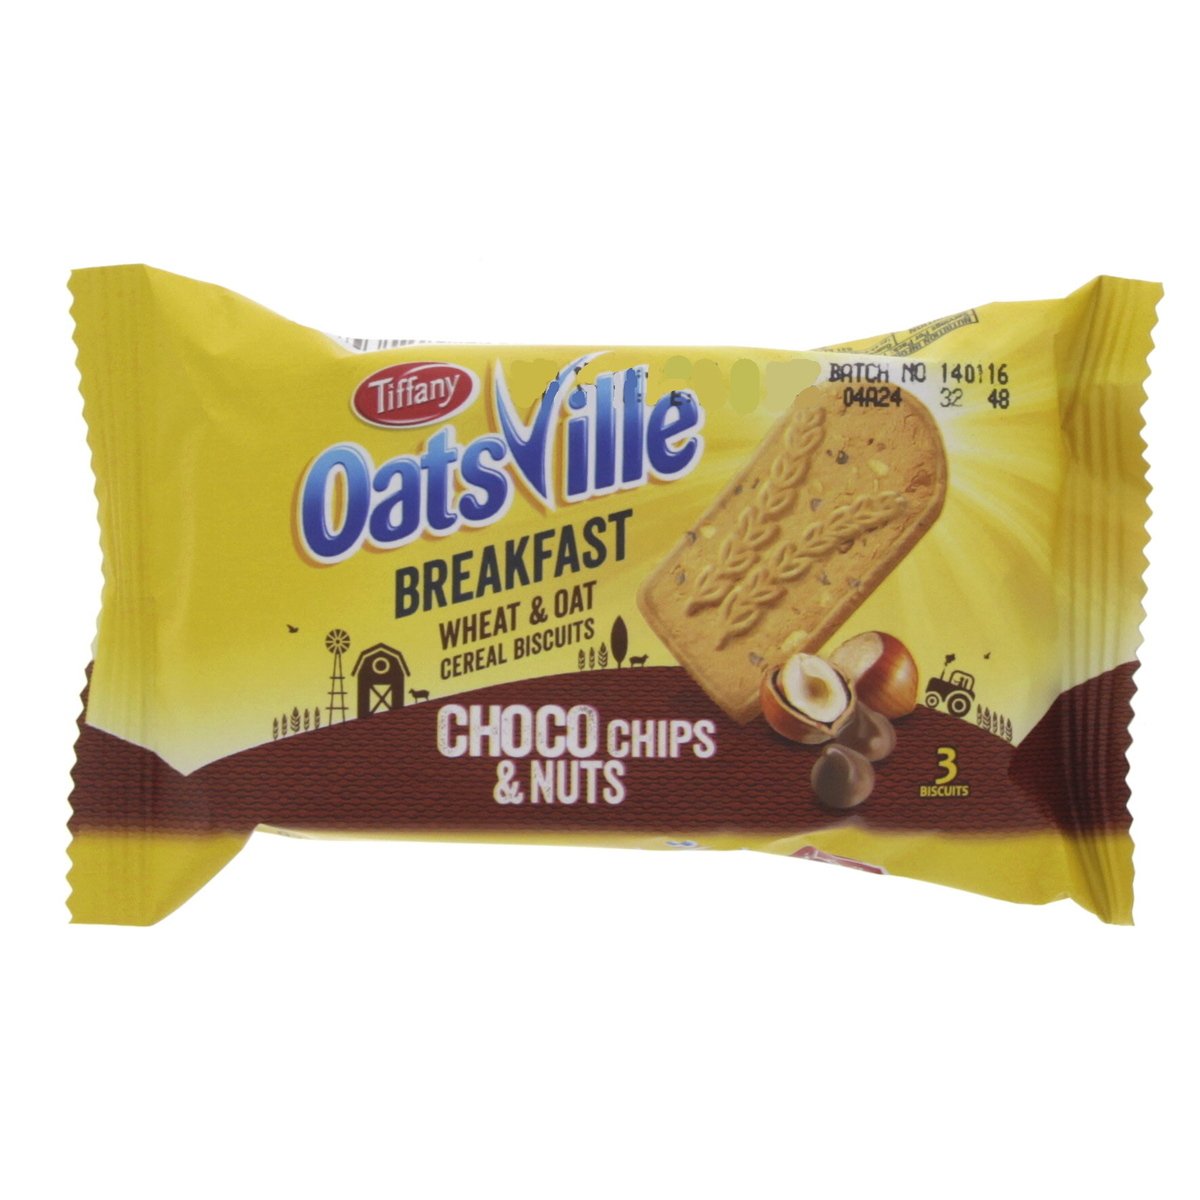 Tiffany Oats Ville Breakfast Choco Chips And Nuts 12 x 50g